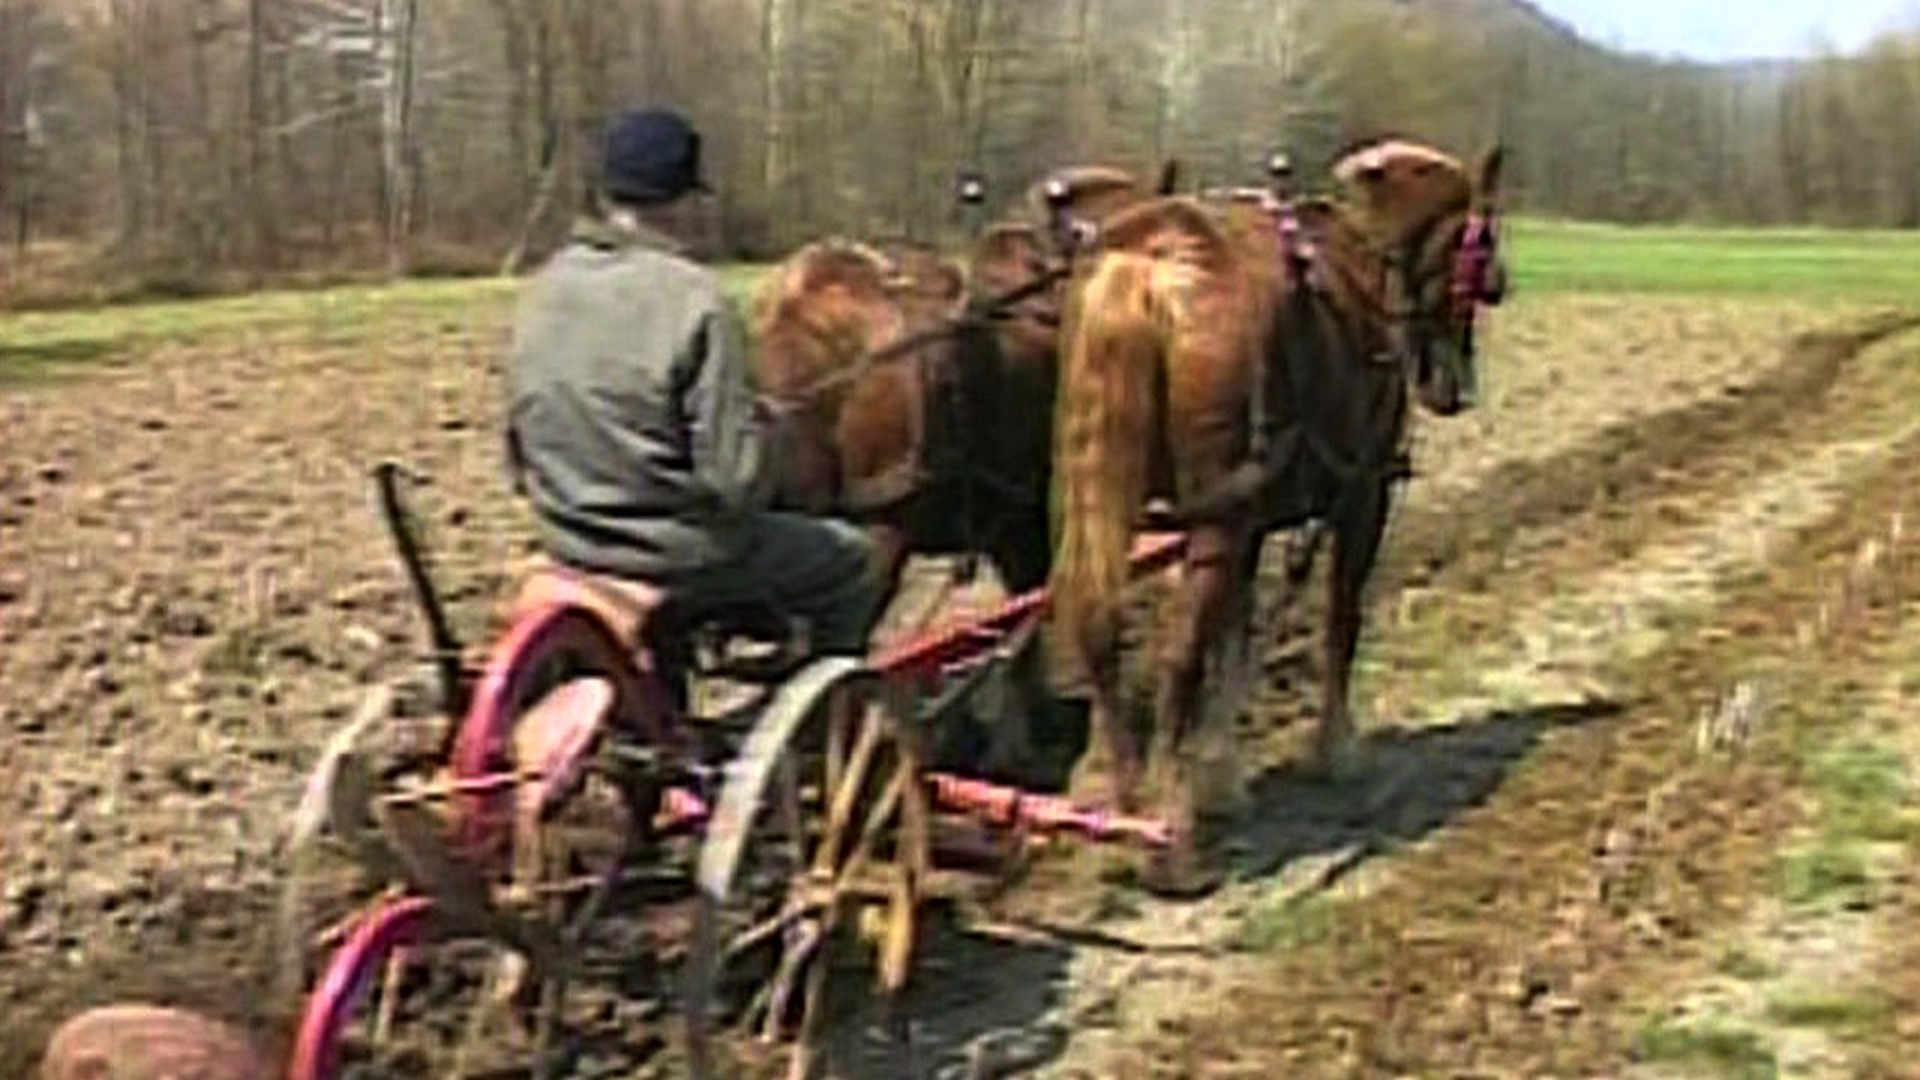 Plowing with a Team of Horses